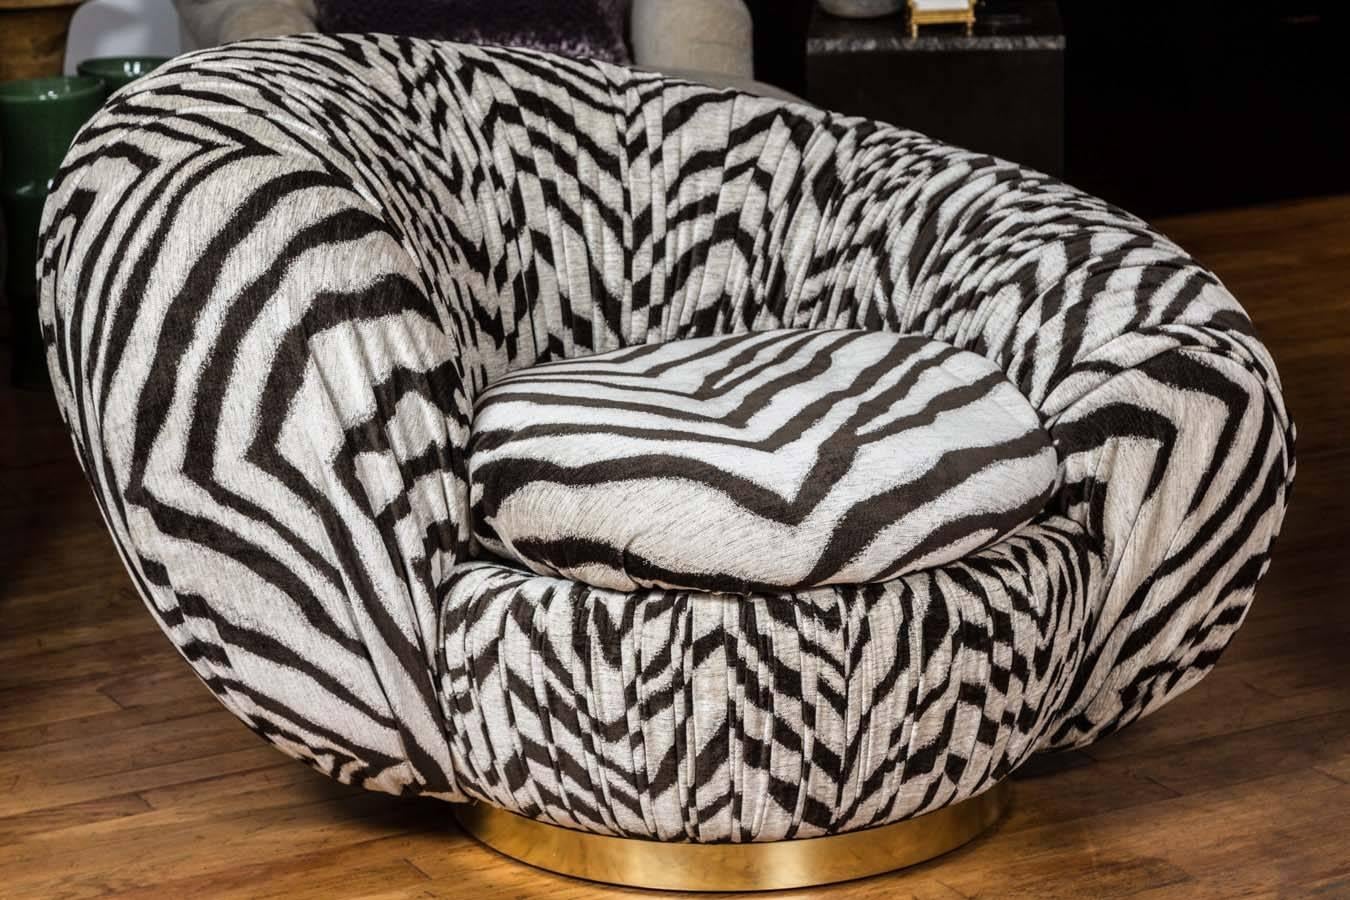 Lounge chair on swivel with loose down feather blend seat cushion and gathered fabric body on brushed brass base. Fabric is highland court zebby or onyx. 83% Rayon/12% Polyester/5% Cotton.